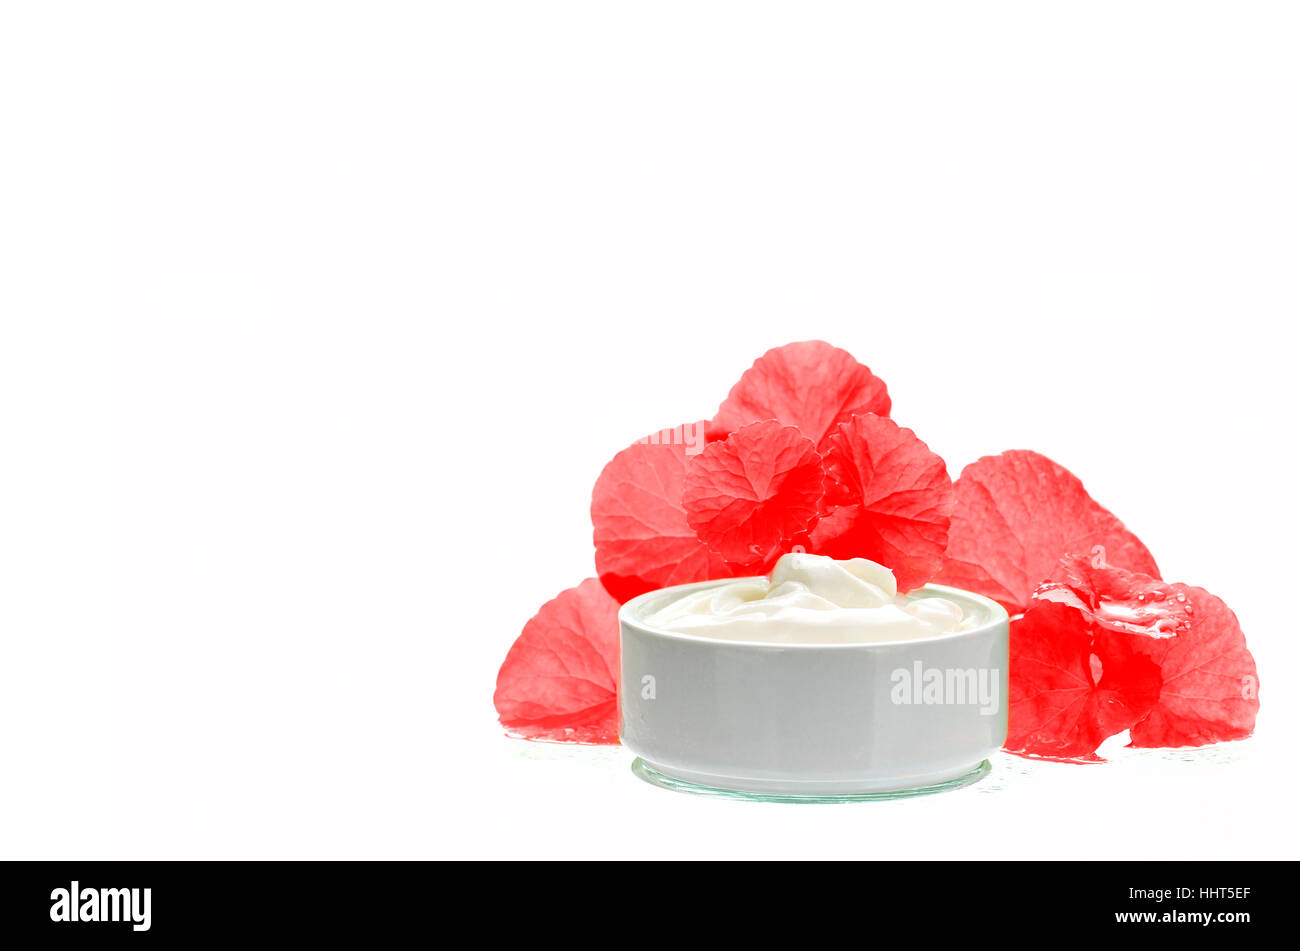 Centella asiatica leaves and skincare product in red and white tone. Indian pennywort (Centella asiatica (L.) Urban.) anti-aging skin care product. Stock Photo